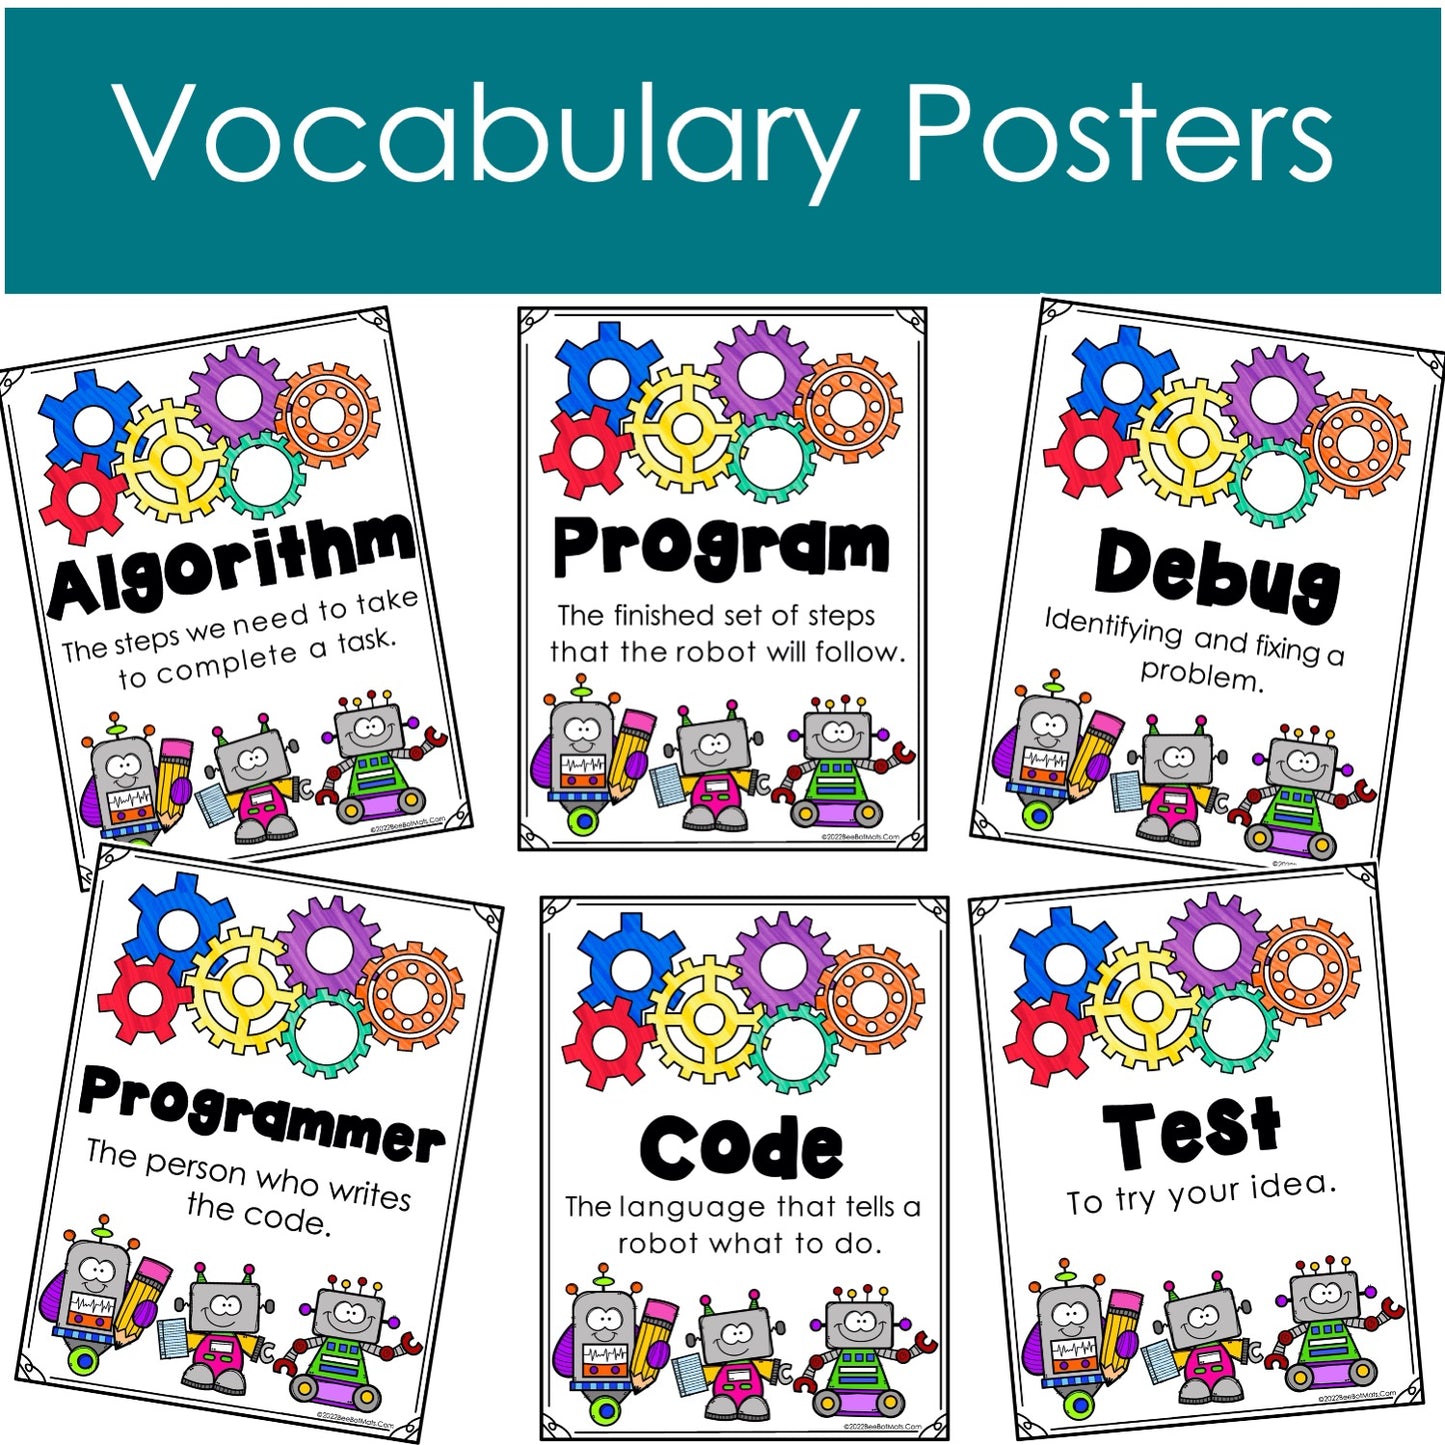 Computer science classroom vocabulary posters